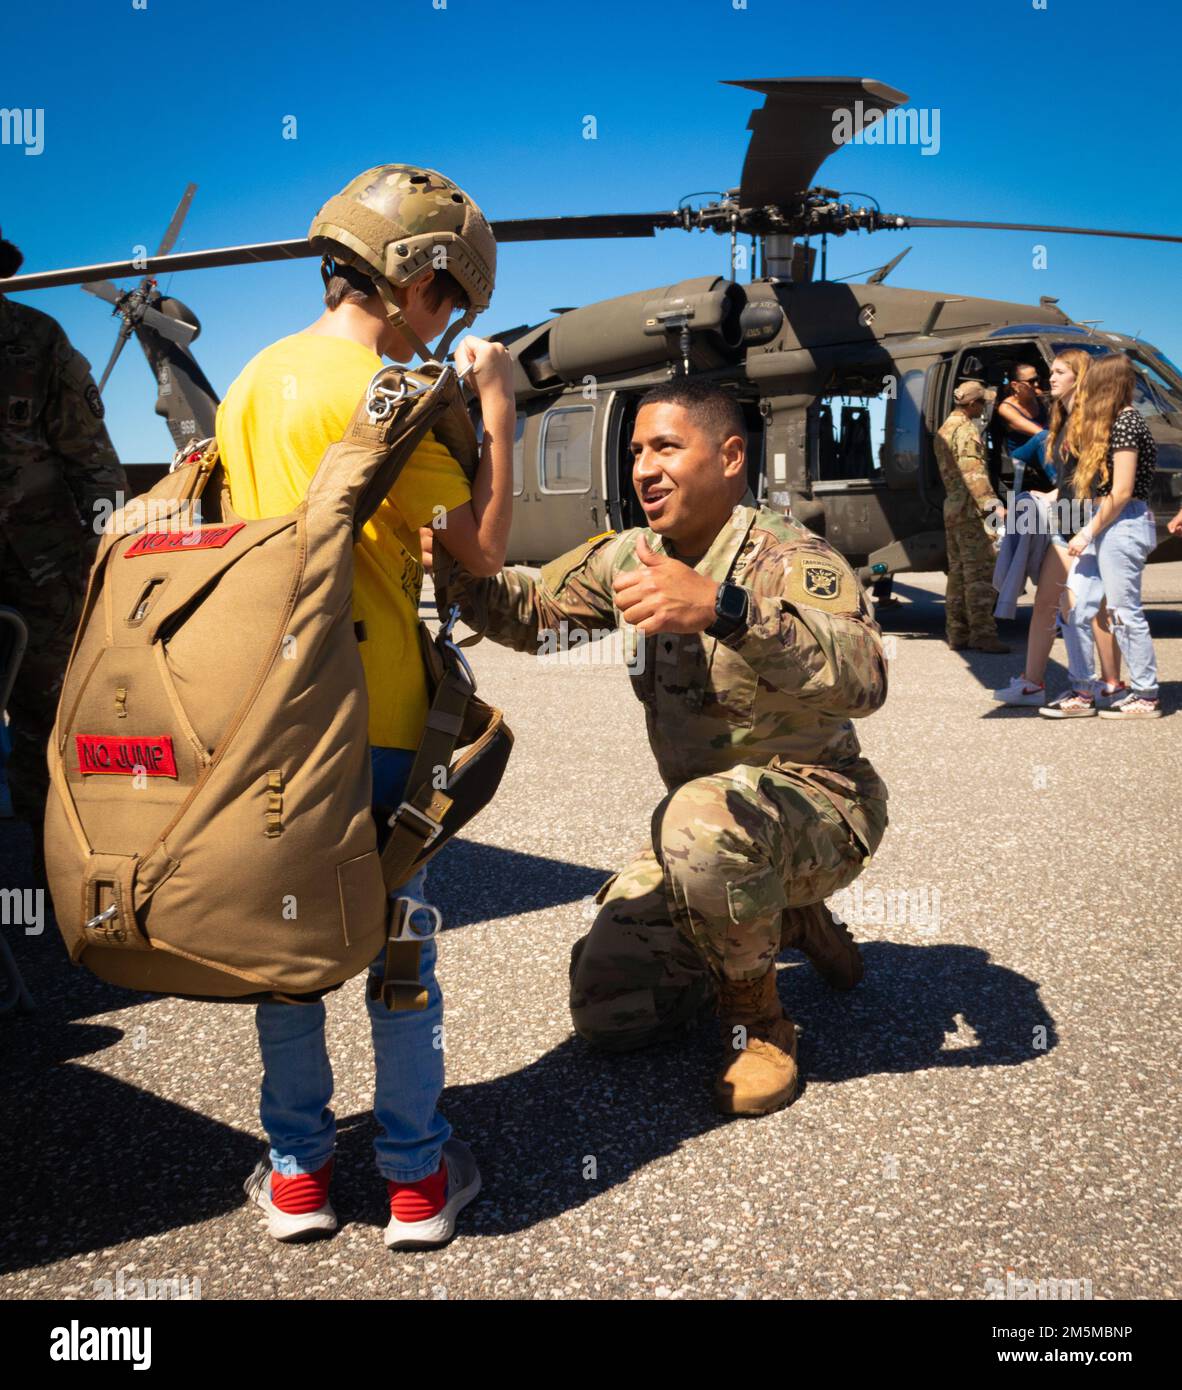 U.S. Army Spc. Nathaniel L. Petrini, a parachute rigger assigned to C Company, Support Battalion, 1st Special Warfare Training Group, helps a boy put on a parachute during the Tampa Bay Airfest hosted at MacDill Air Force Base, Florida, March 26, 2022. Petrini, a native of the Islando of Hawaii, was one of dozens of Soldiers who helped set up and operate the Airfest’s Army Village. The Army Village featured a myriad of modern and historical Army vehicles, helicopters and airborne equipment. The static and interactive displays attracted thousands of visitors and offered hundreds of opportunitie Stock Photo